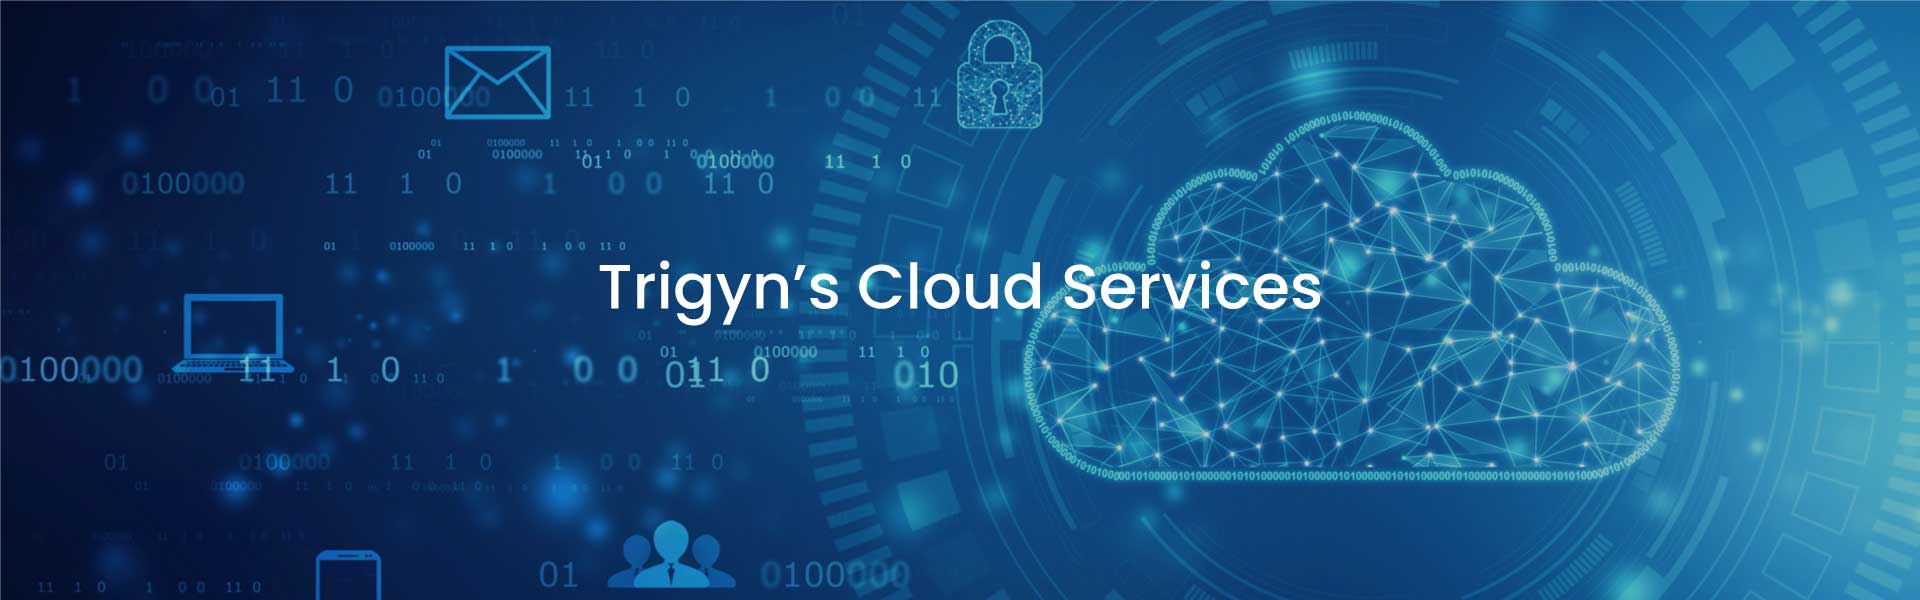 Choosing the Right Cloud Services Provider